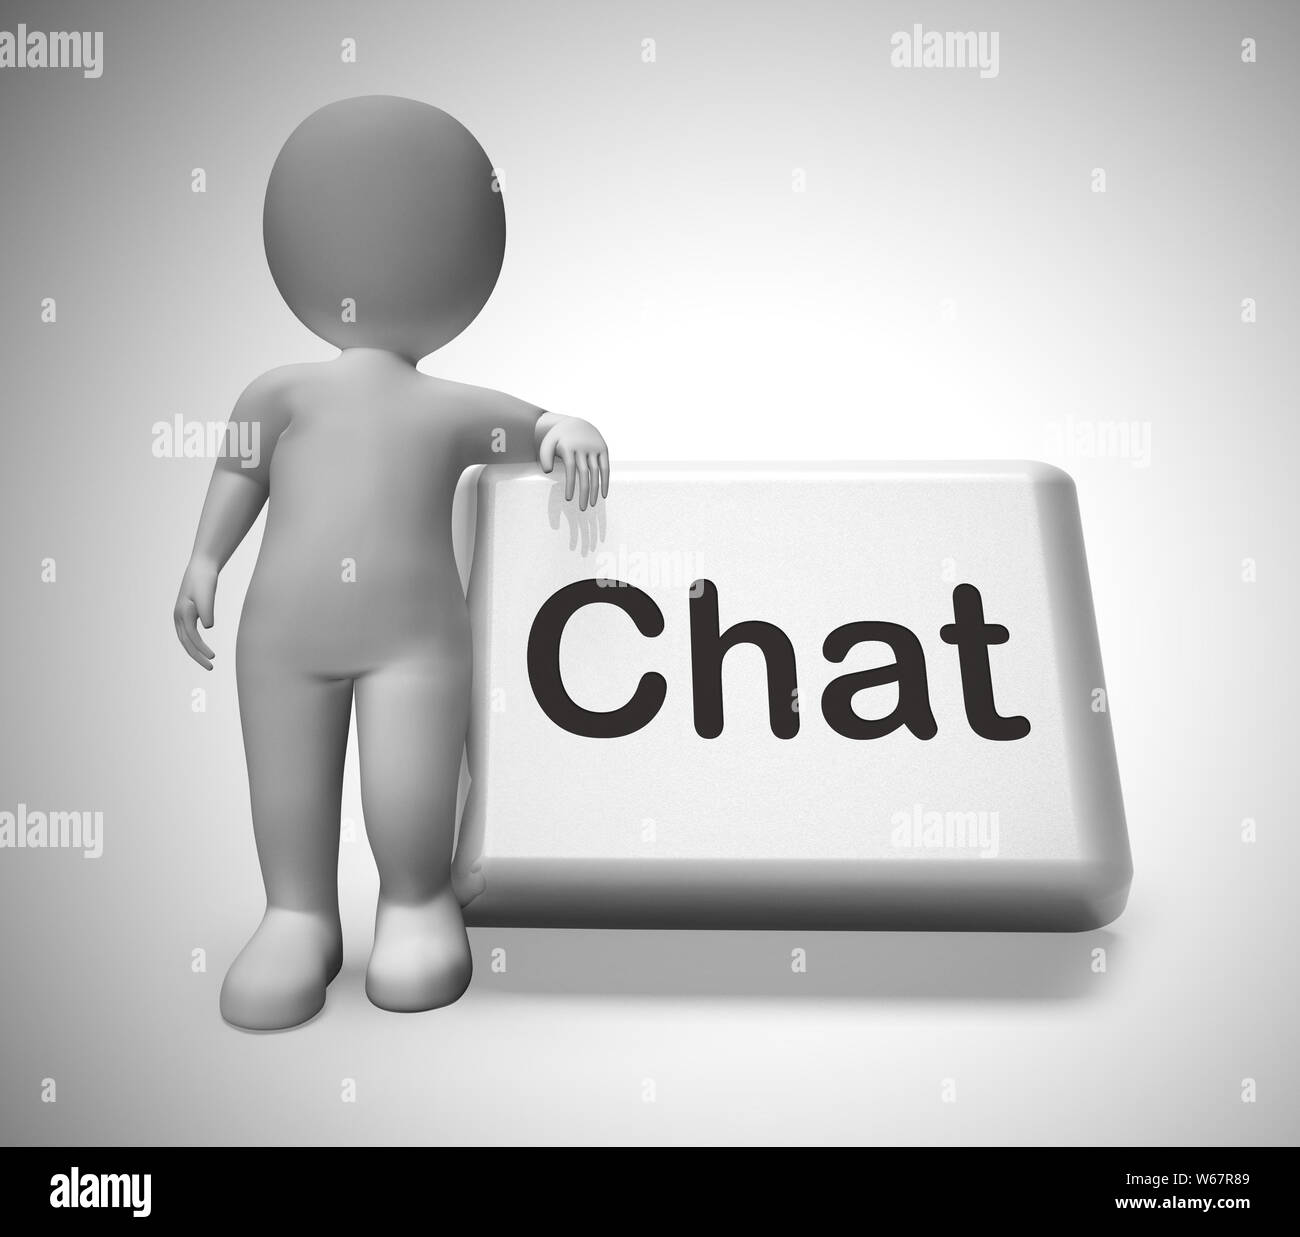 3d chat rooms